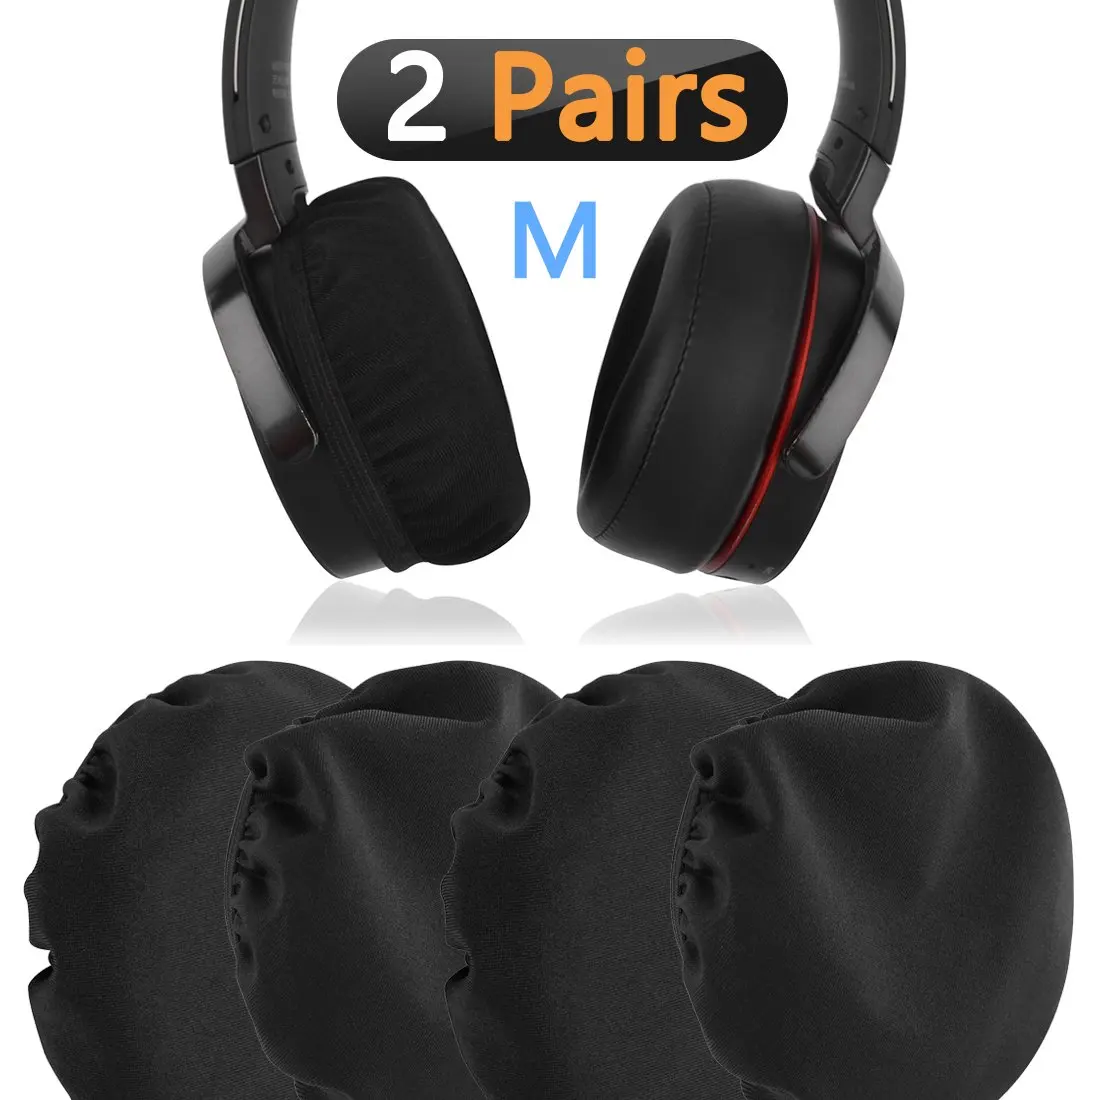 

2 Pairs Headphone Earpad Covers/Stretchable and Washable Sanitary Earcup Protectors. Fits 1"-6" Over-Ear Headset Ear Cushions